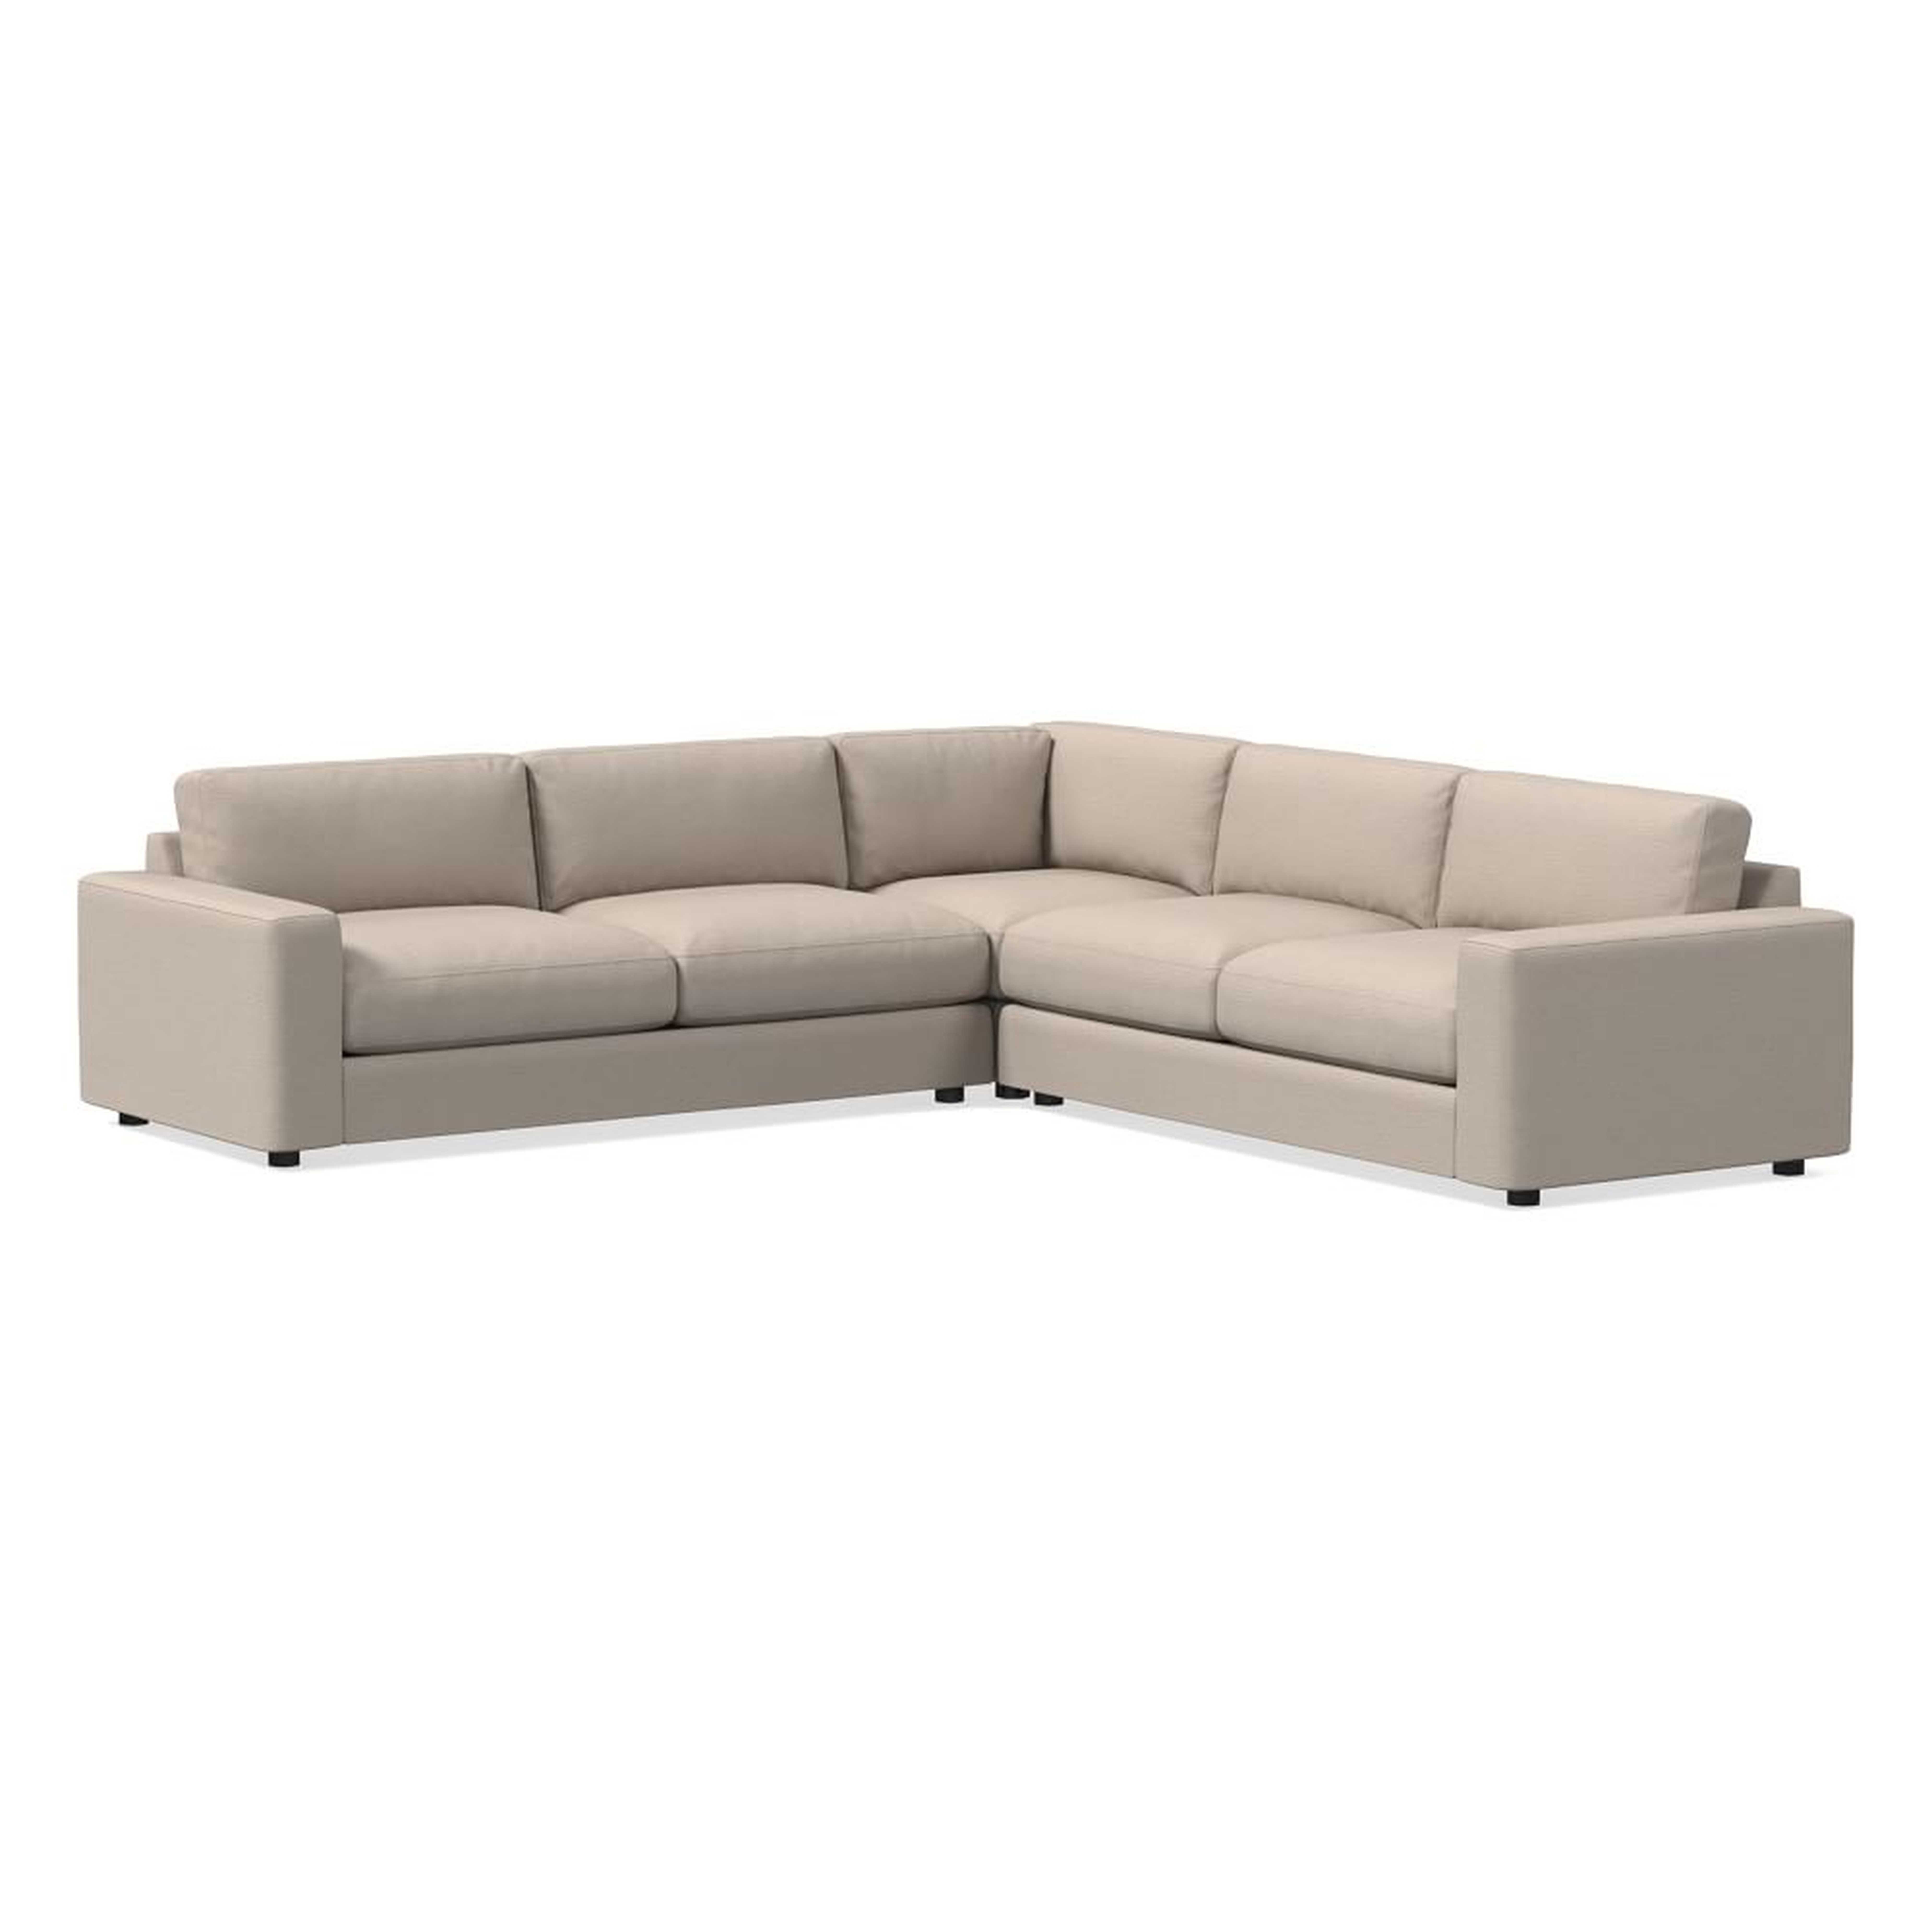 Urban 116" 3-Piece L-Shaped Sectional, Yarn Dyed Linen Weave, Sand, Down Blend Fill - West Elm